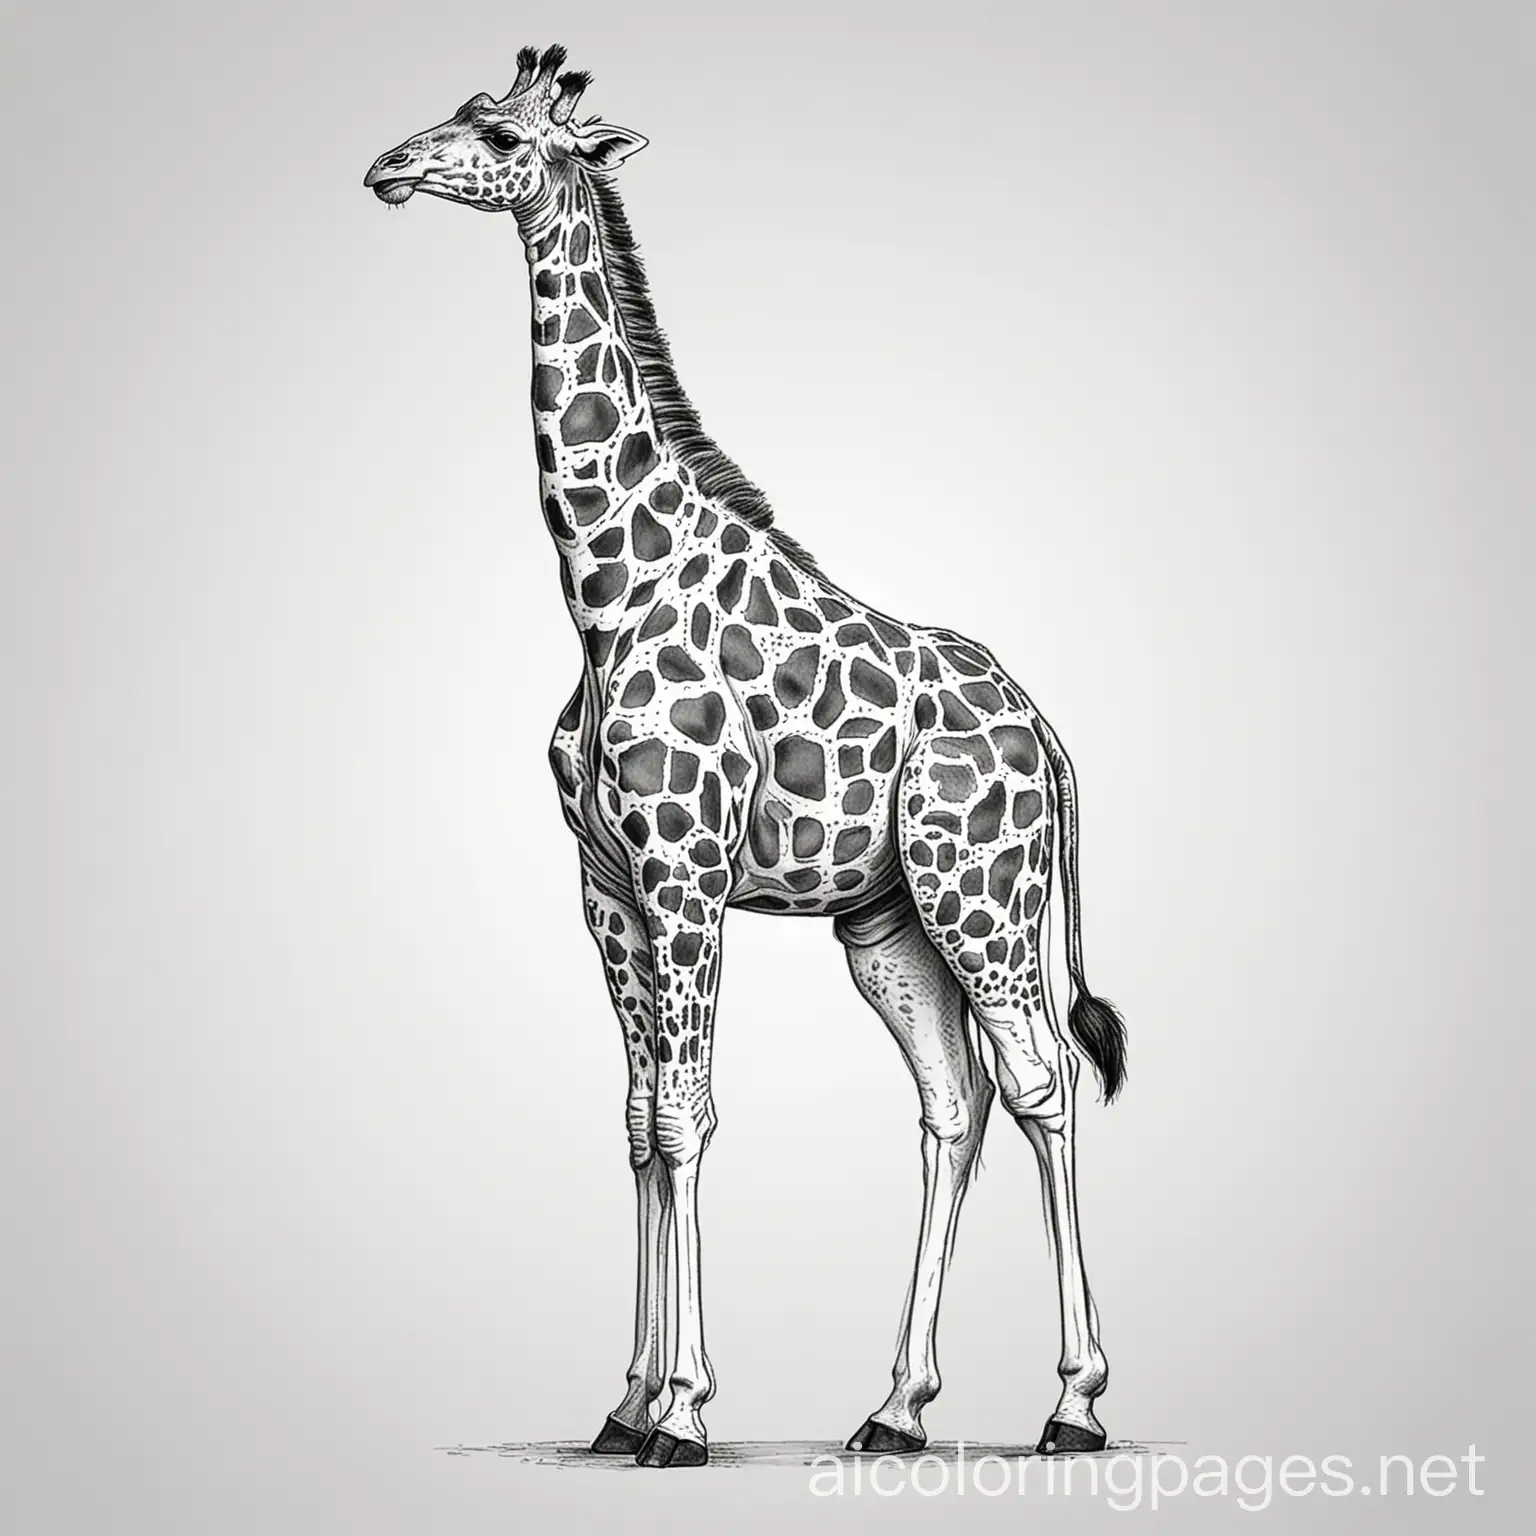 happy standing giraffe, Coloring Page, black and white, line art, white background, Simplicity, Ample White Space. The background of the coloring page is plain white to make it easy for young children to color within the lines. The outlines of all the subjects are easy to distinguish, making it simple for kids to color without too much difficulty